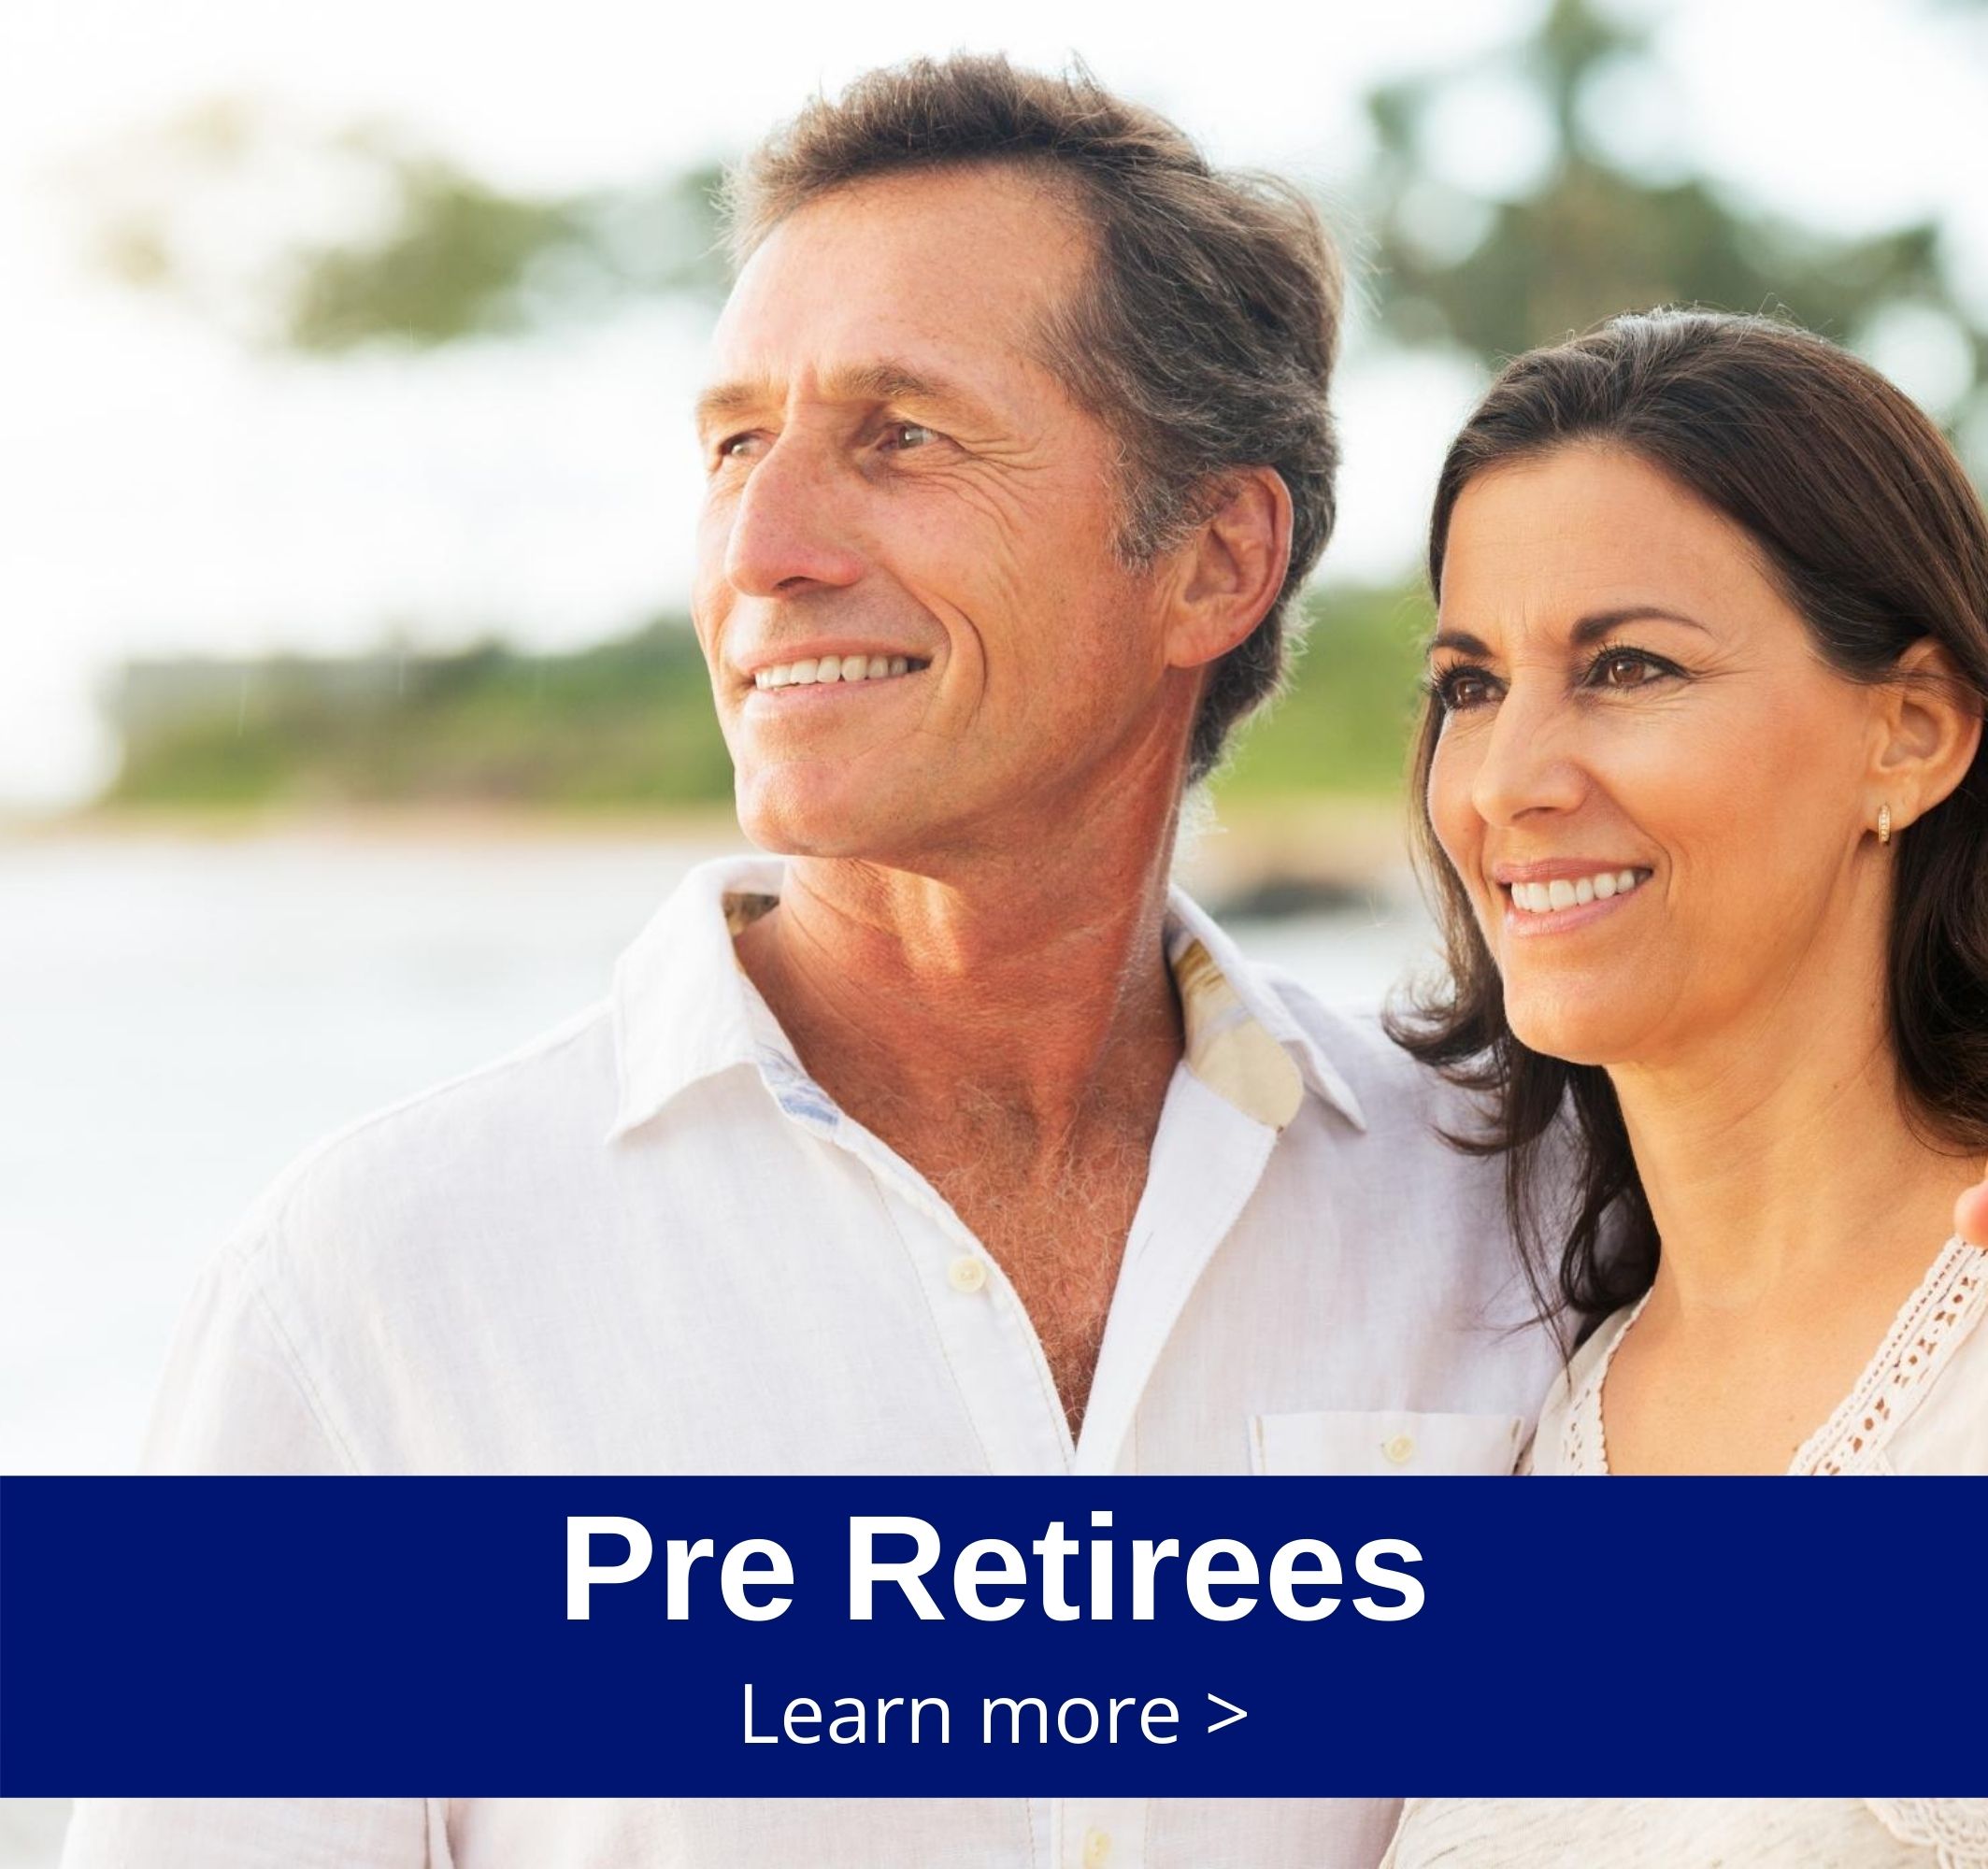 Financial advice for pre retirees